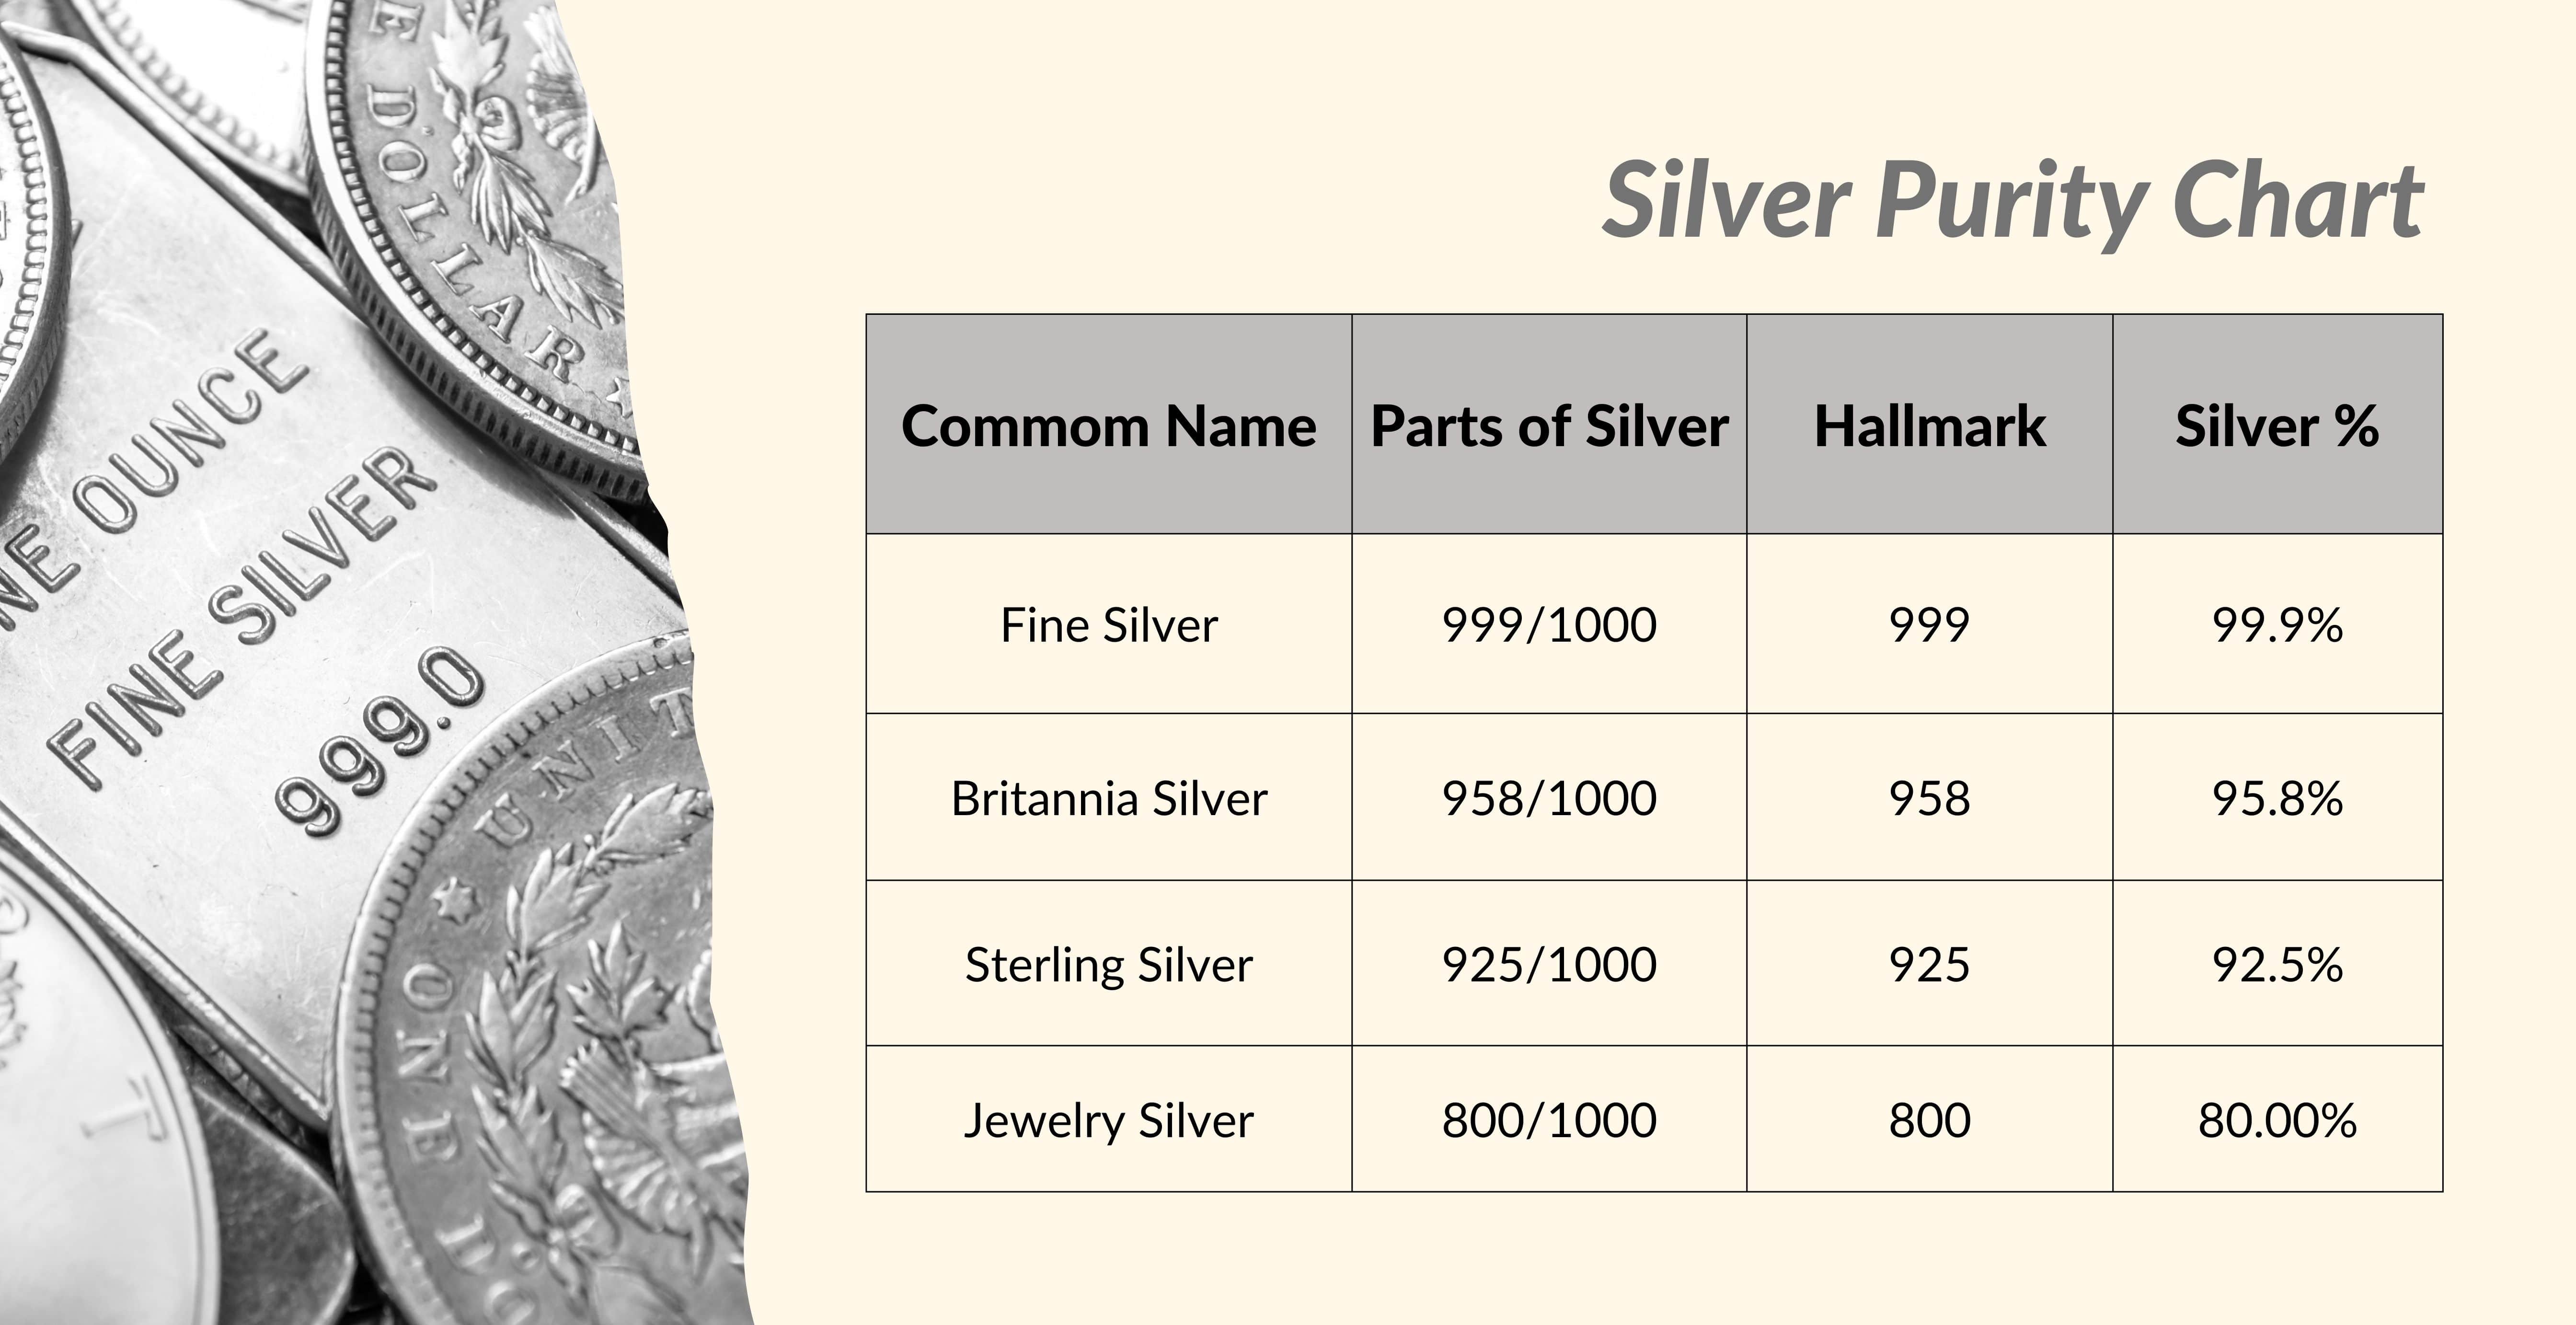 Silver purity chart